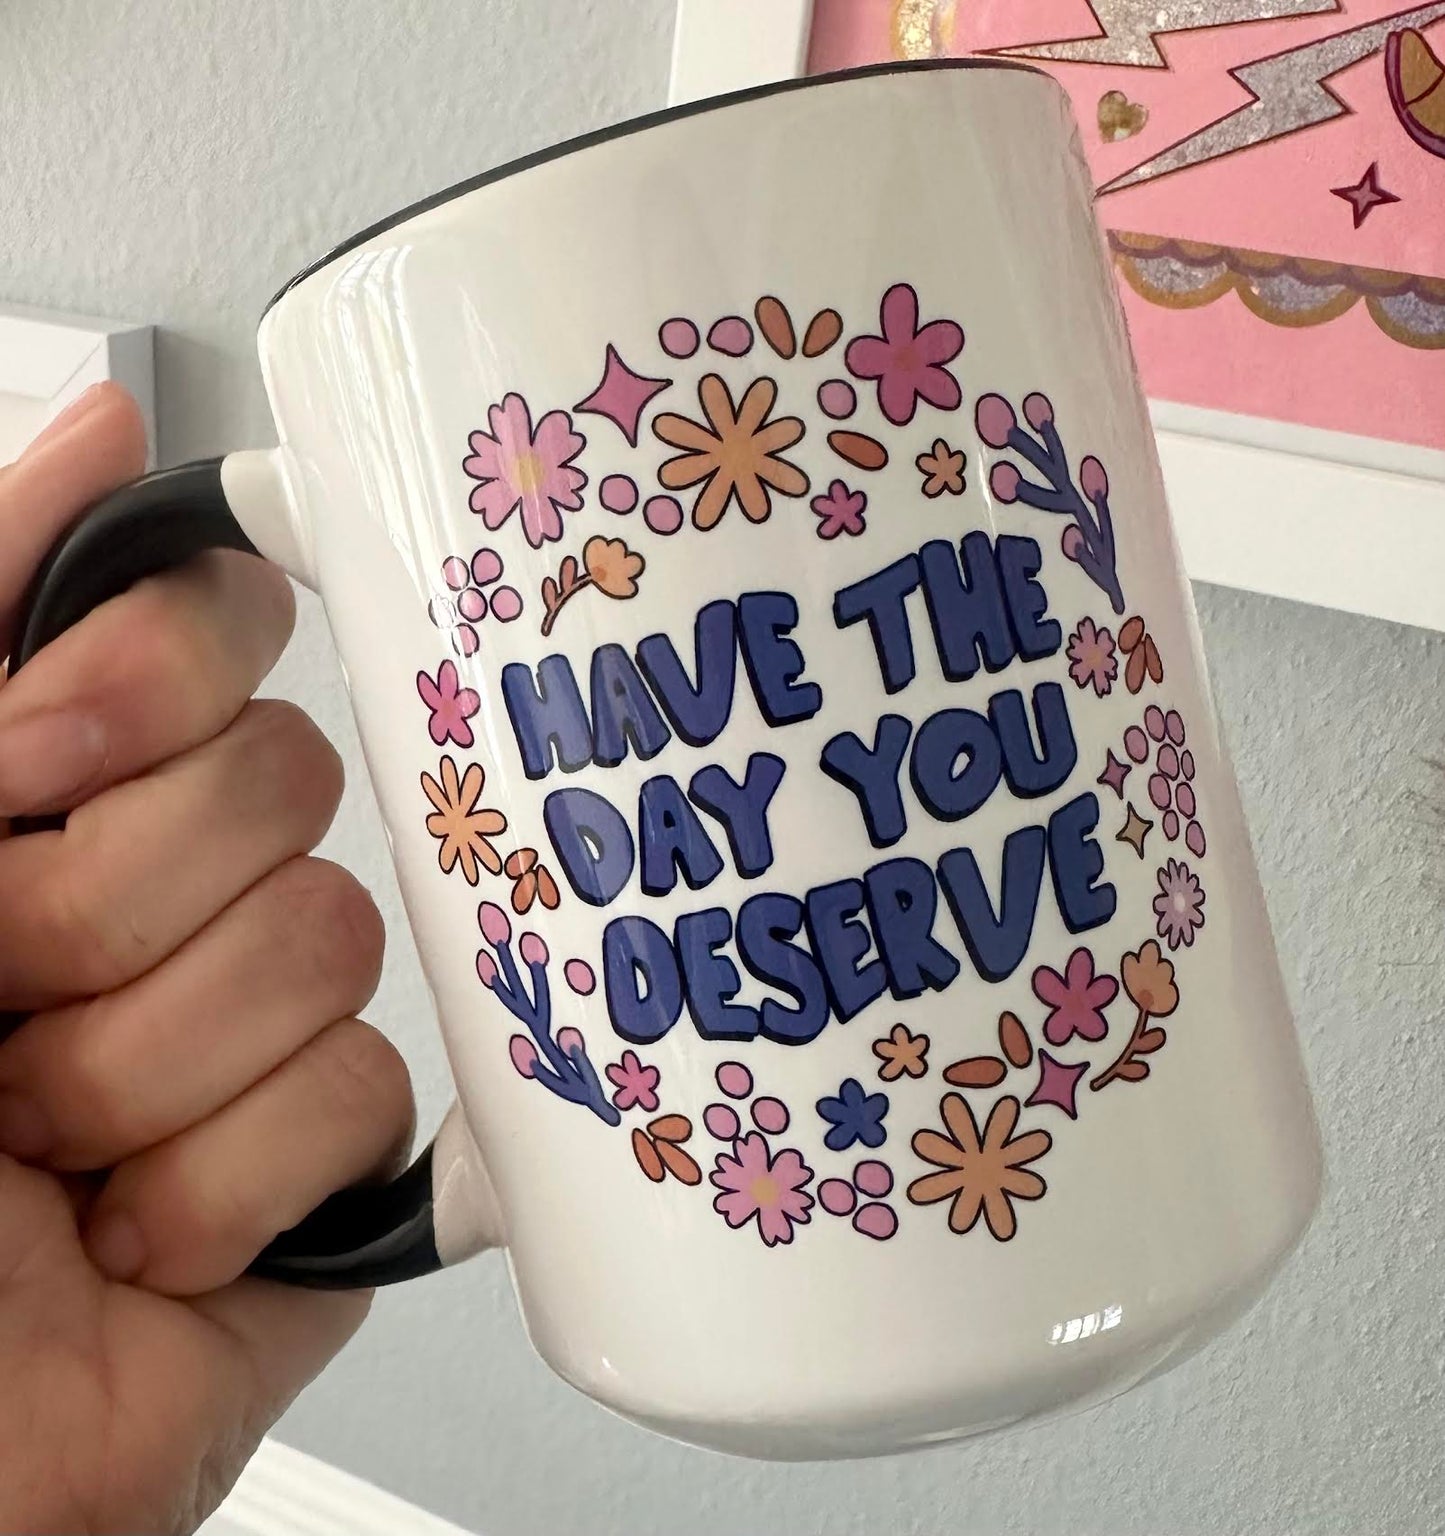 Have The Day You Deserve 15 oz Mug (2 colors available)